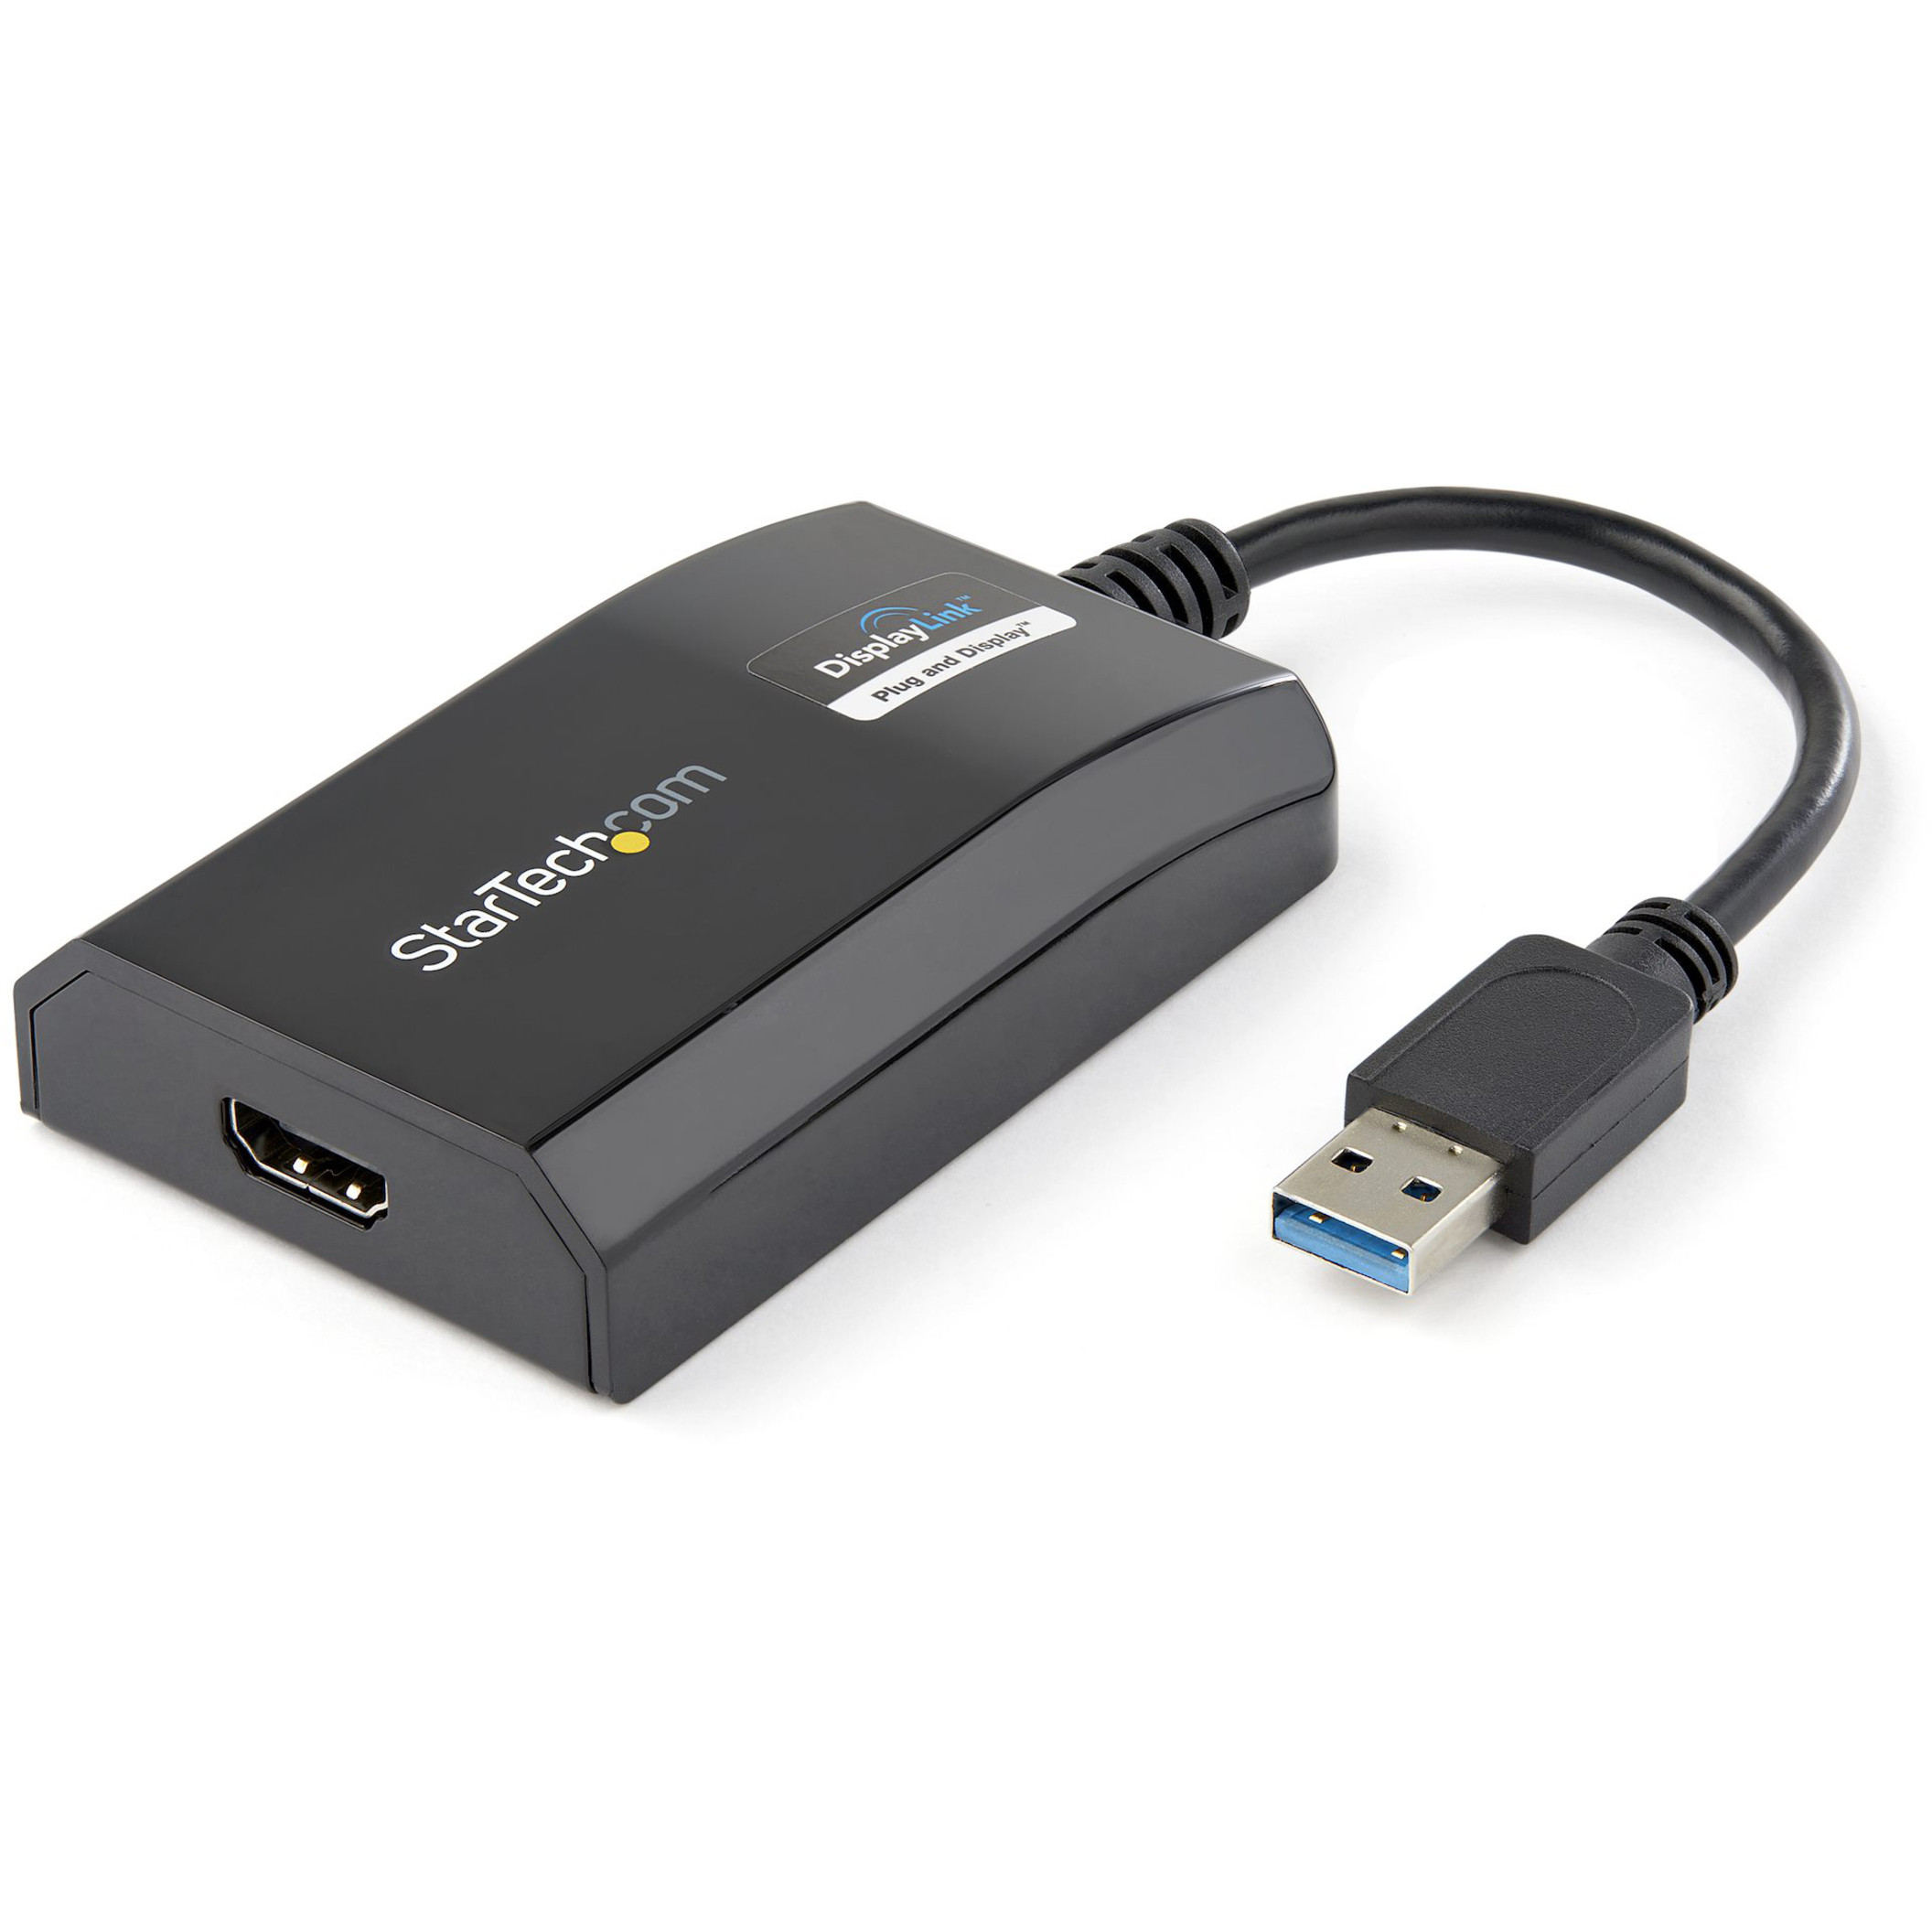 oversætter klipning Pounding Startech .com USB 3.0 to HDMI Adapter, DisplayLink Certified, 1920x1200, USB-A  to HDMI Display Adapter, External Graphics Card for Mac/PCUS... USB32HDPRO  - Corporate Armor